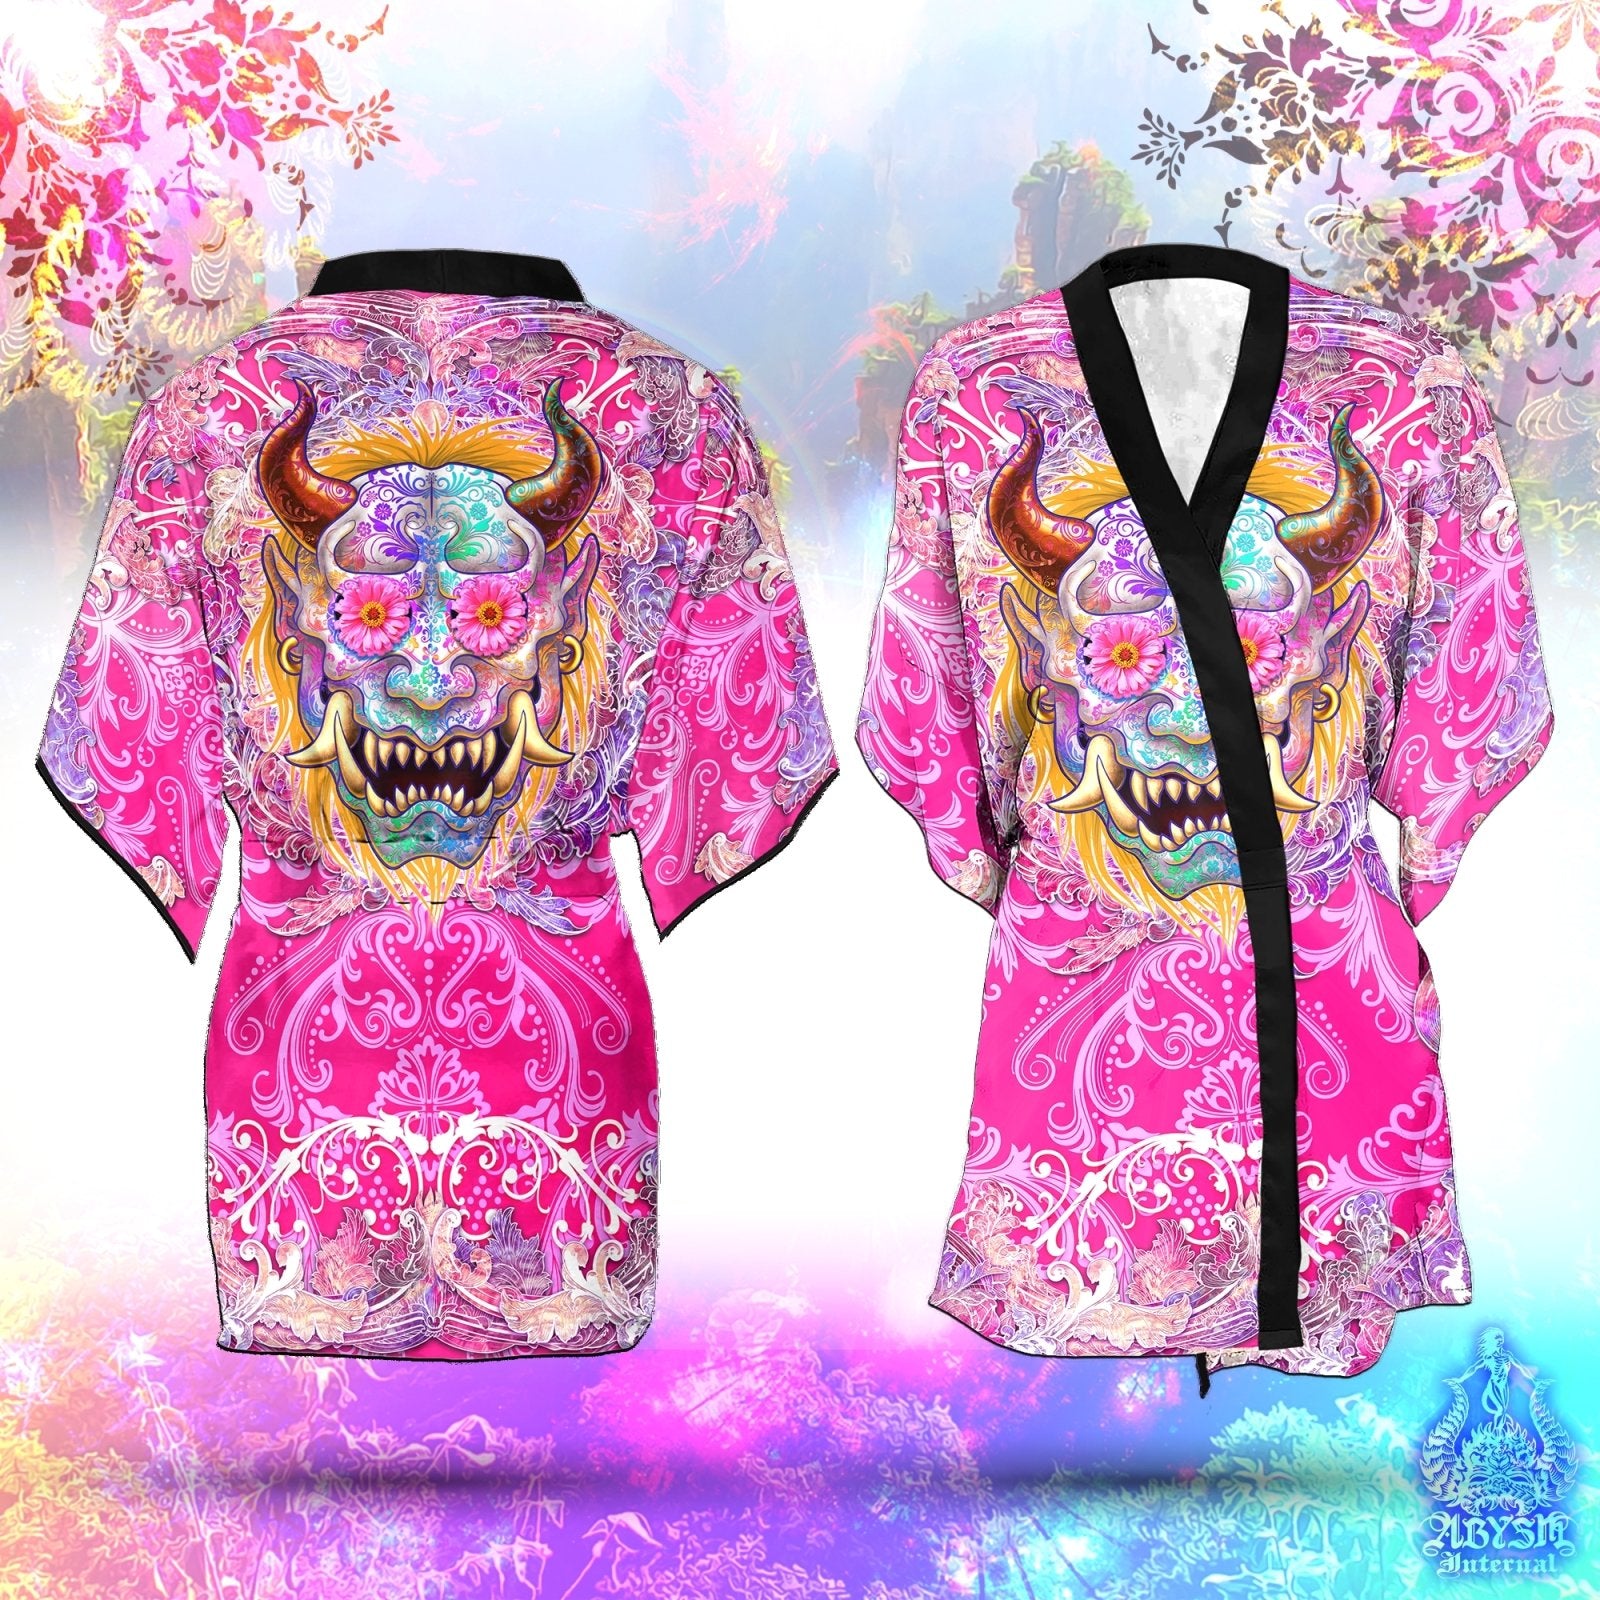 Demon Cover Up, Beach Outfit, Oni Party Kimono, Japanese Summer Festival Robe, Indie and Alternative Clothing, Unisex - Psy - Abysm Internal